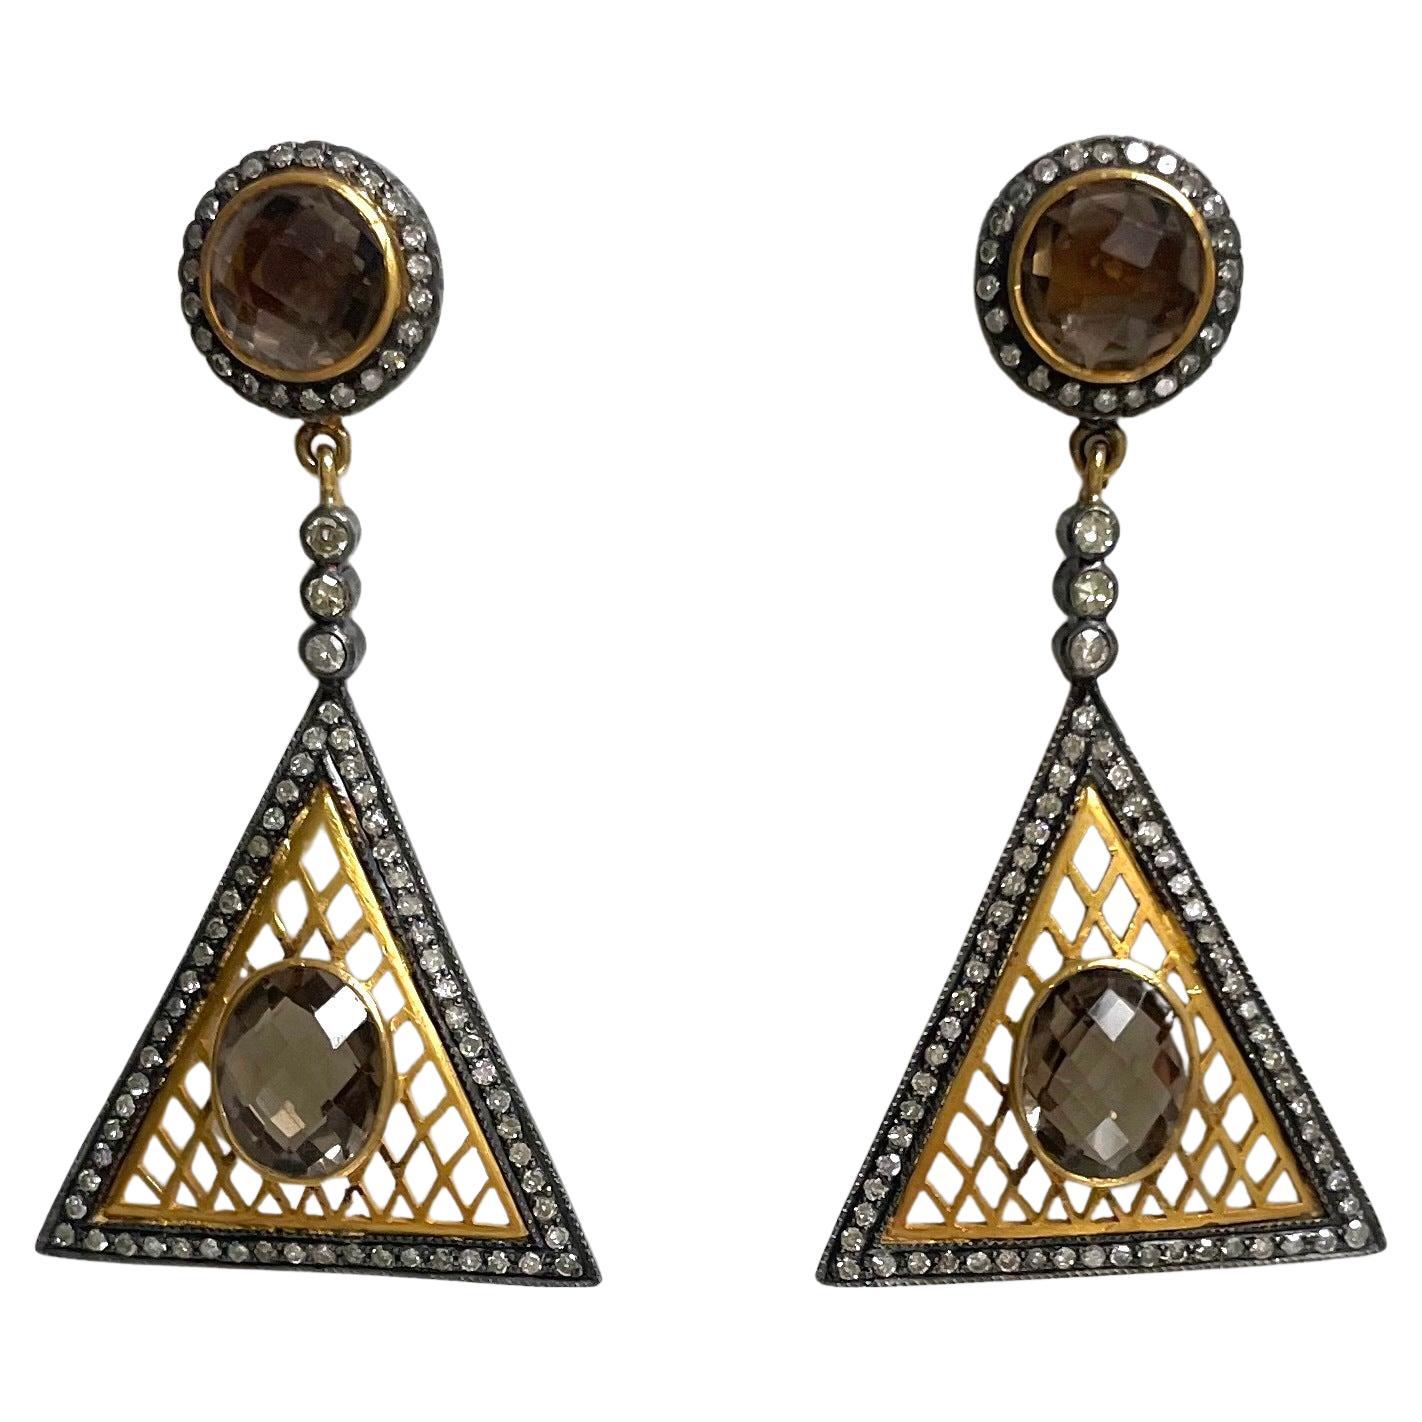 Description
Beauty, Power and Style are the affair of the heart of these dramatic earrings. The irresistible geometry of a triangle with the exquisite Smoky Quartz and diamonds add a sense of sparkle and elegance to your fashion statement mirroring